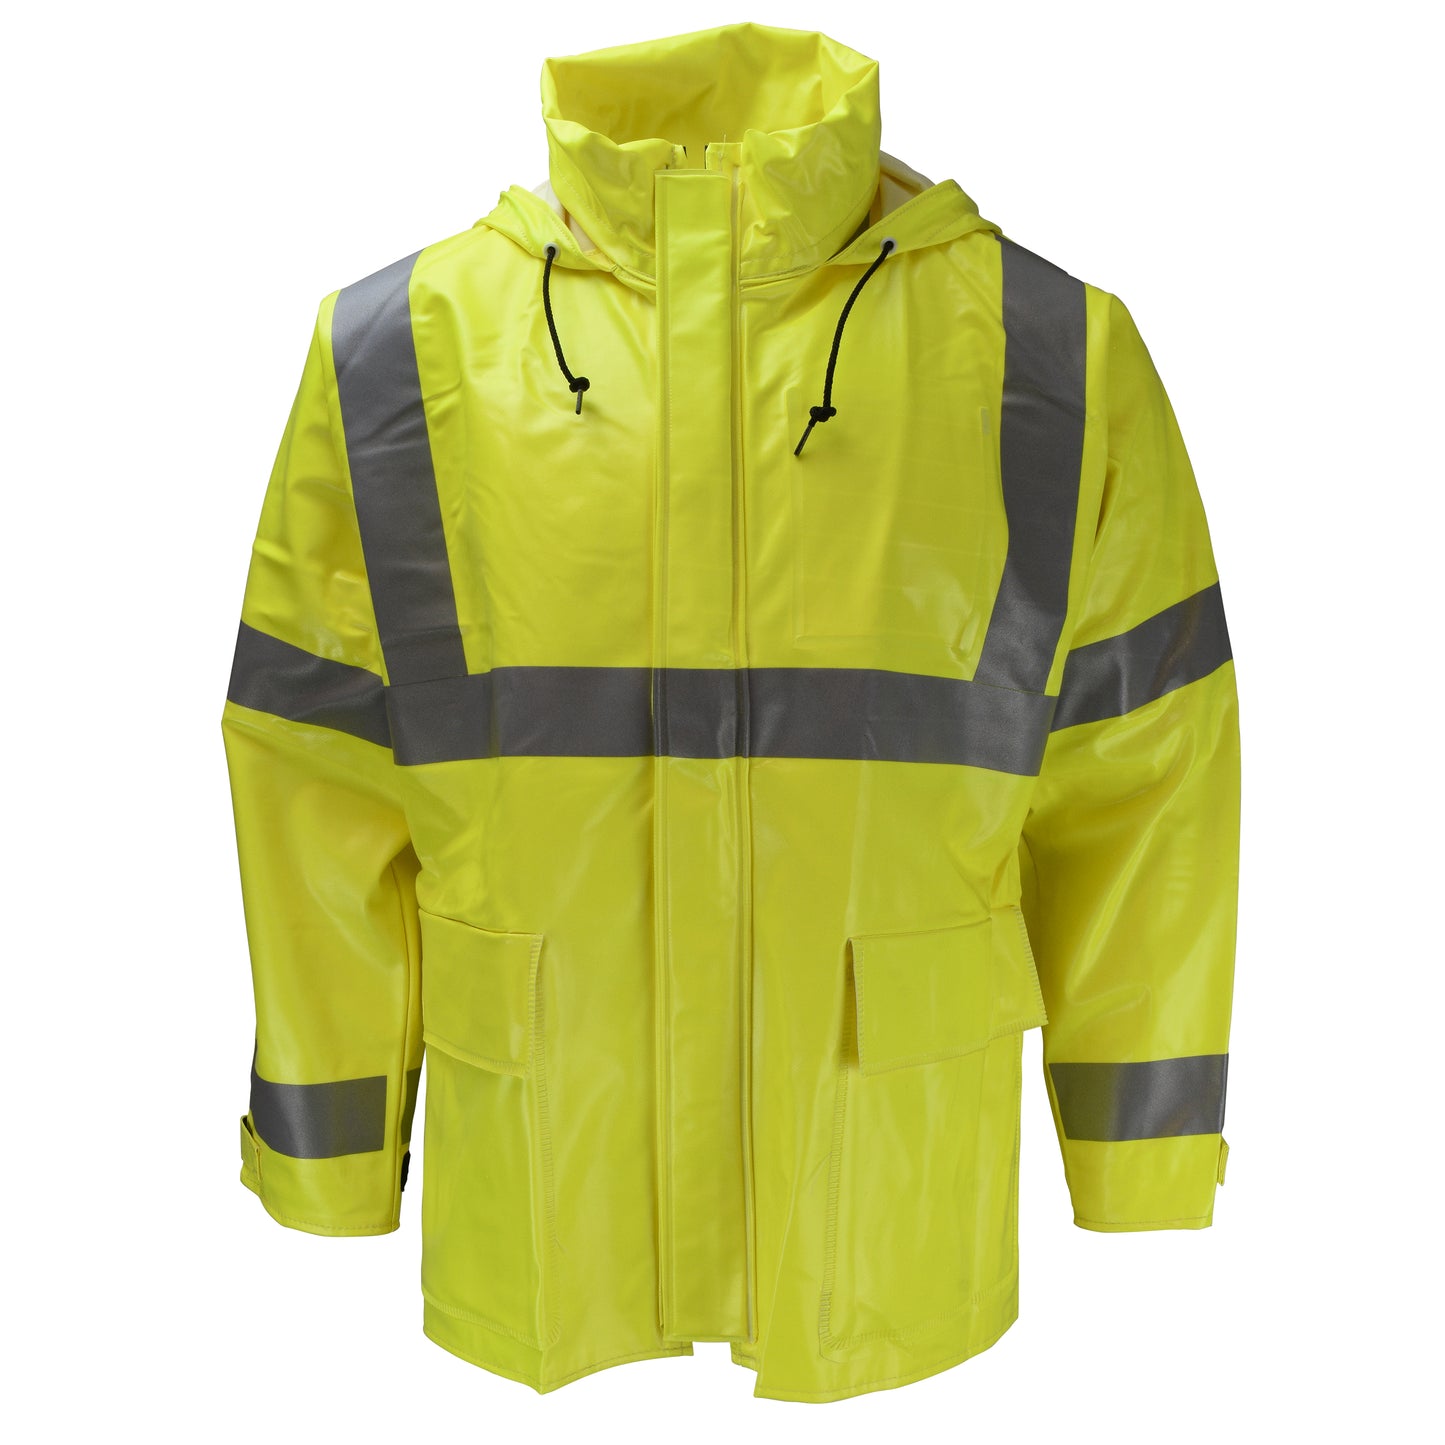 Neese Dura Arc II Series Jacket with Attached Hood